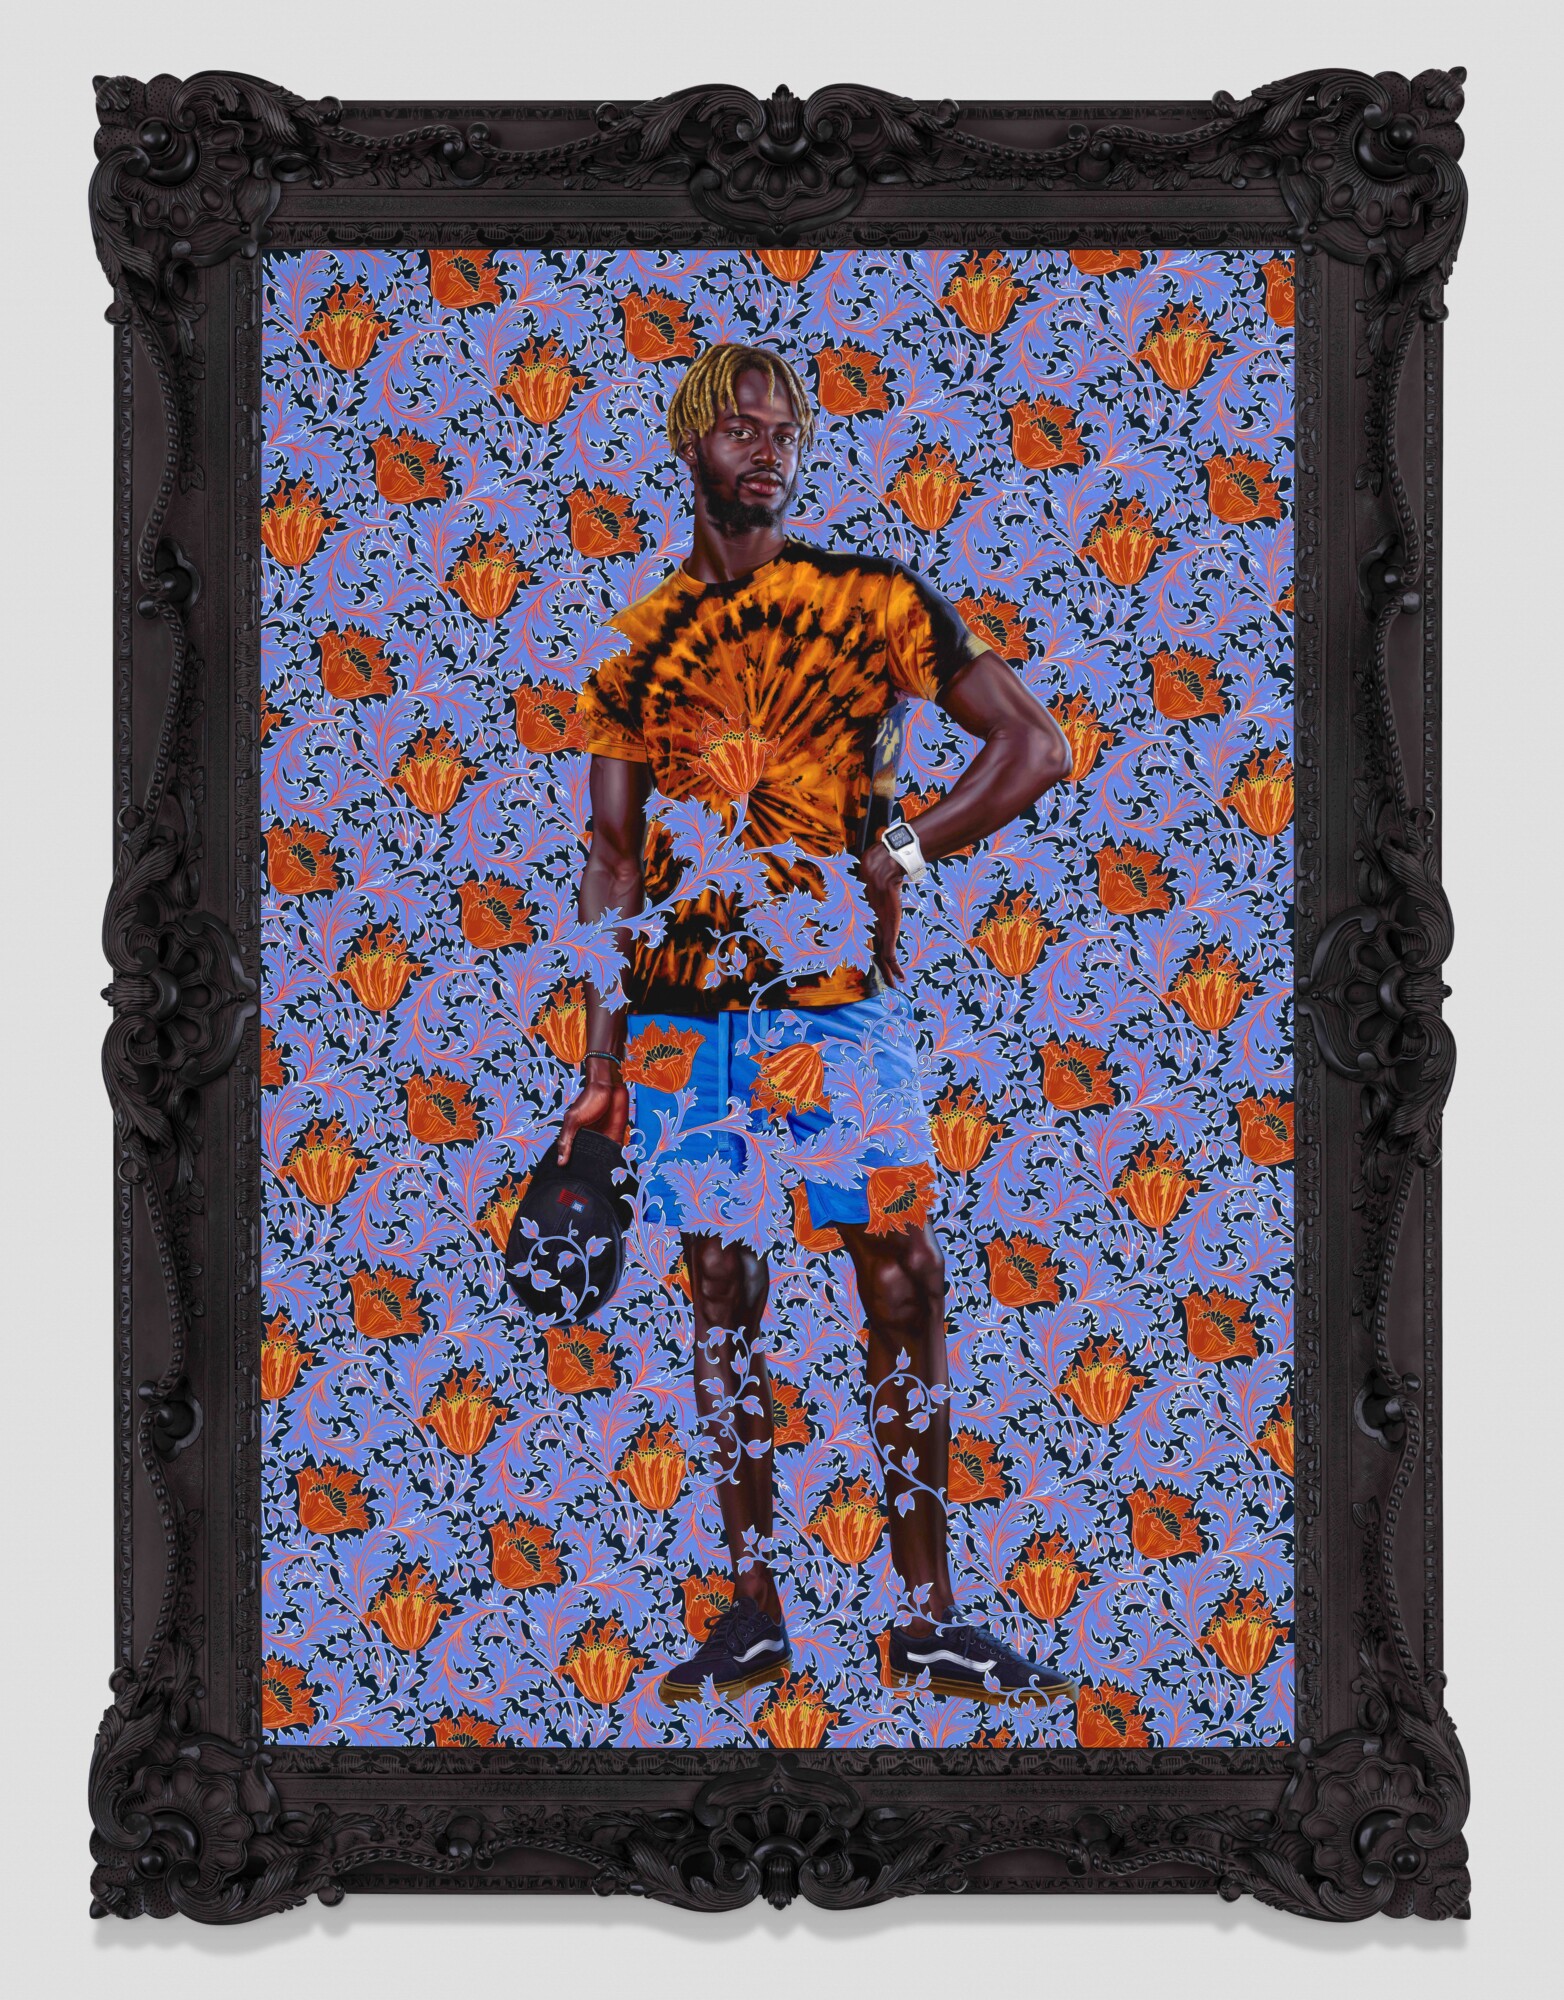 kehindewiley_A_Portrait_of_a_Young_Gentleman